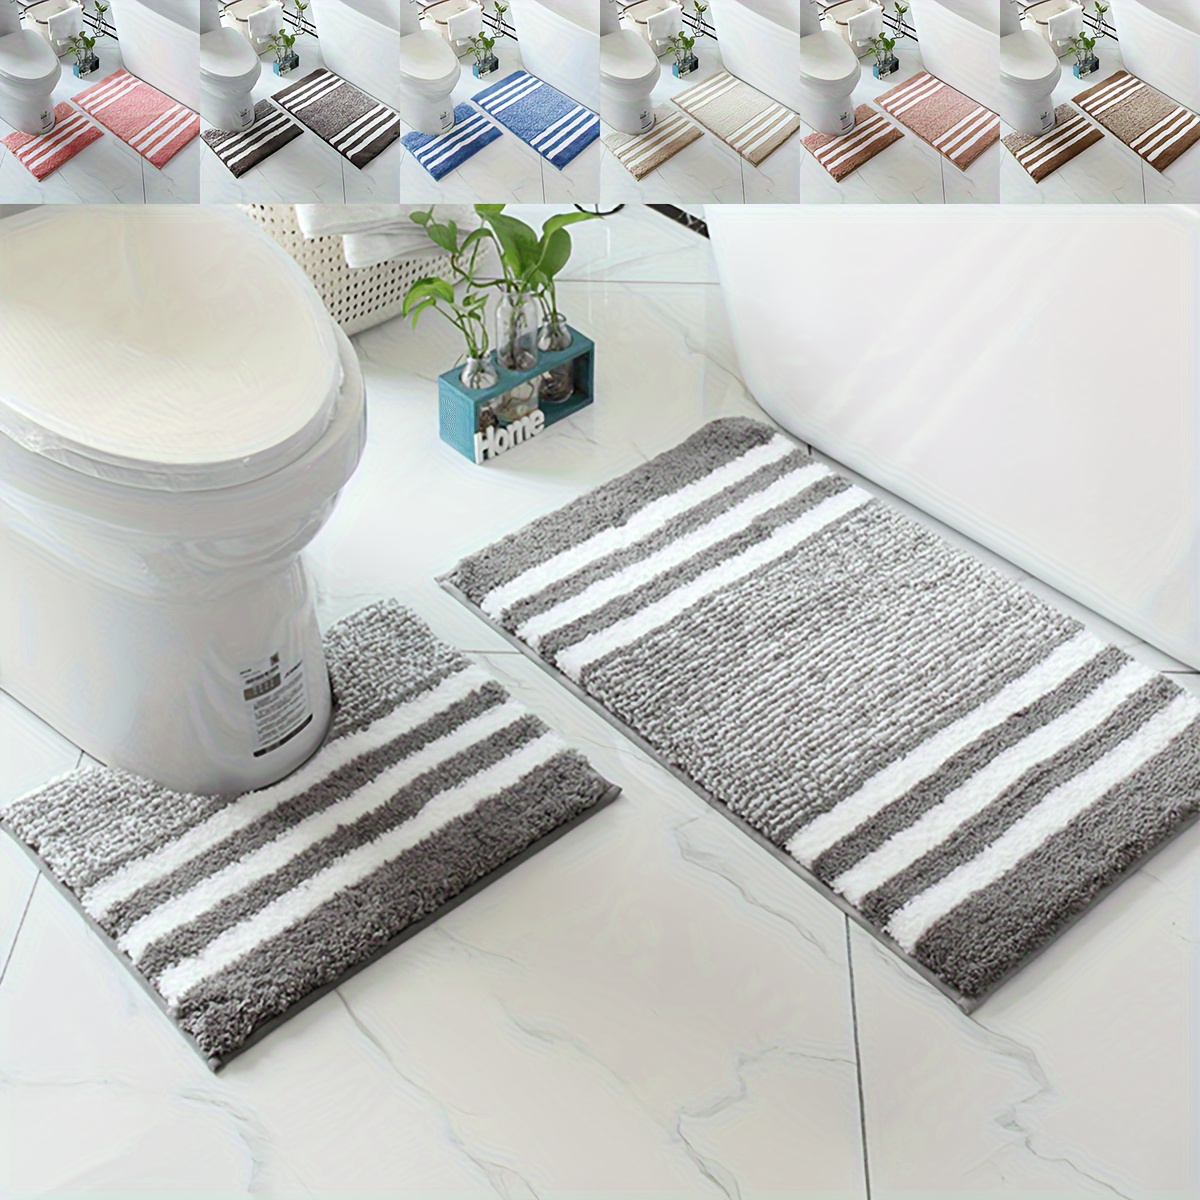  Smart Linen 3 Piece Bathroom Rug Set Includes Bath Rug, Contour  Mat and Toilet Lid Cover, Machine Washable, Super Soft Microfiber & Non  Slip Bath Rugs with Rubber Backing Solid (Navy